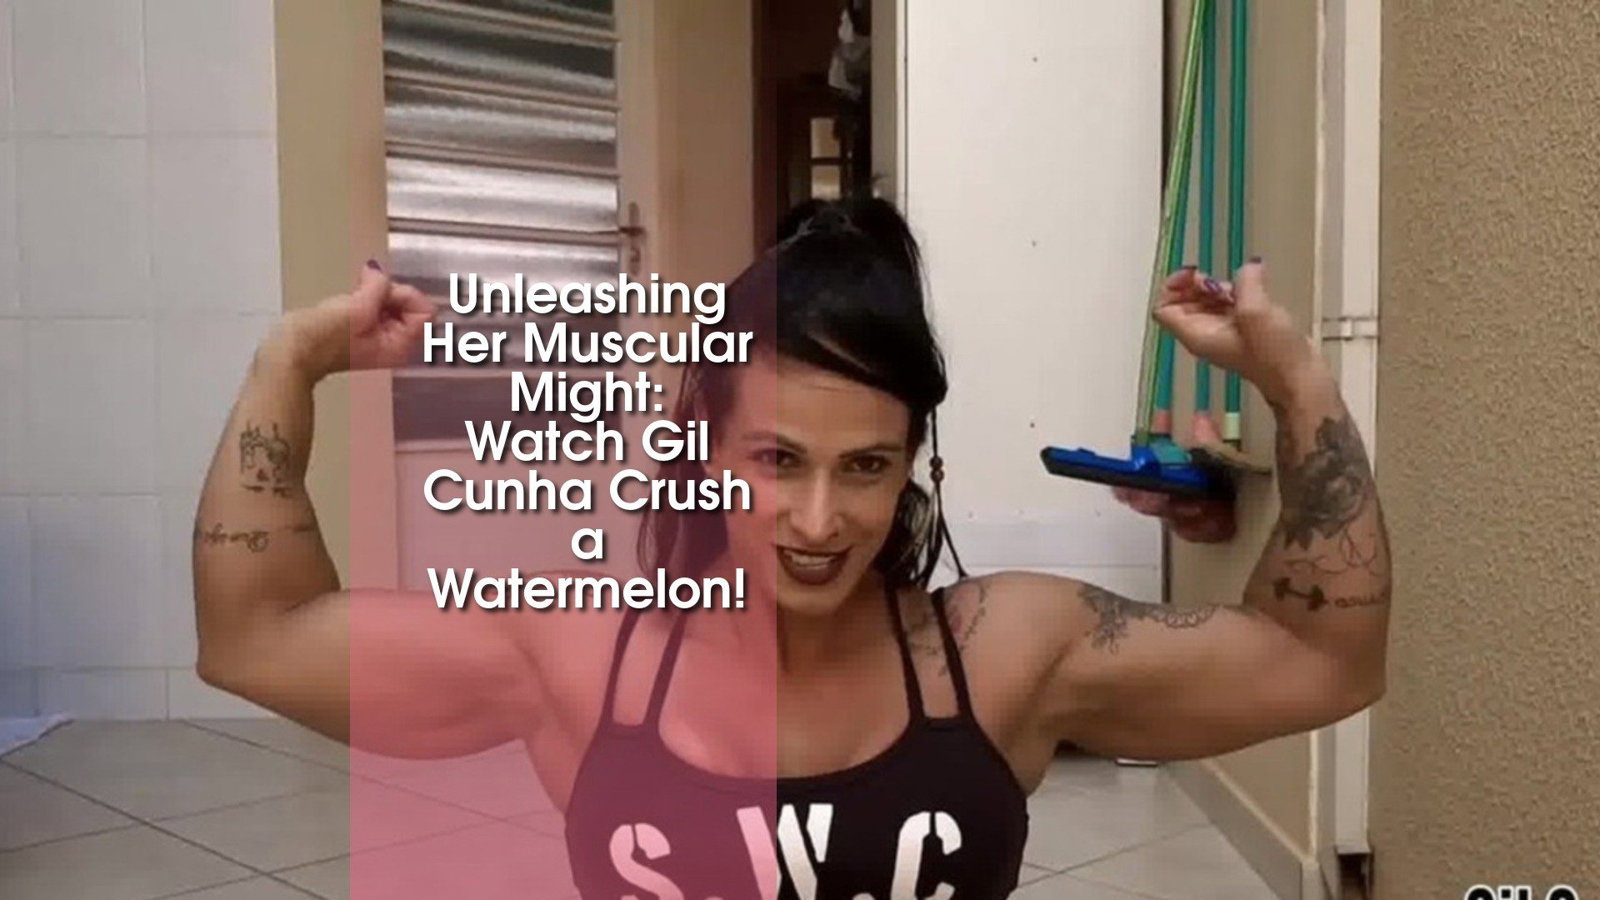 Photo by MusclegirlStrength with the username @MusclegirlStrength, who is a brand user,  January 7, 2024 at 1:55 PM and the text says 'Unleashing Her Muscular Might: Watch Gil Cunha Crush a Watermelon!
Link: https://bit.ly/3qlYEBM

#MuscularWomen #StrongAndSexy #BicepsOfSteel #GoddessesWithMuscles #PowerfulFemales #FlexFriday #StrengthAndBeauty #FitFemales #BeastModeGirls..'